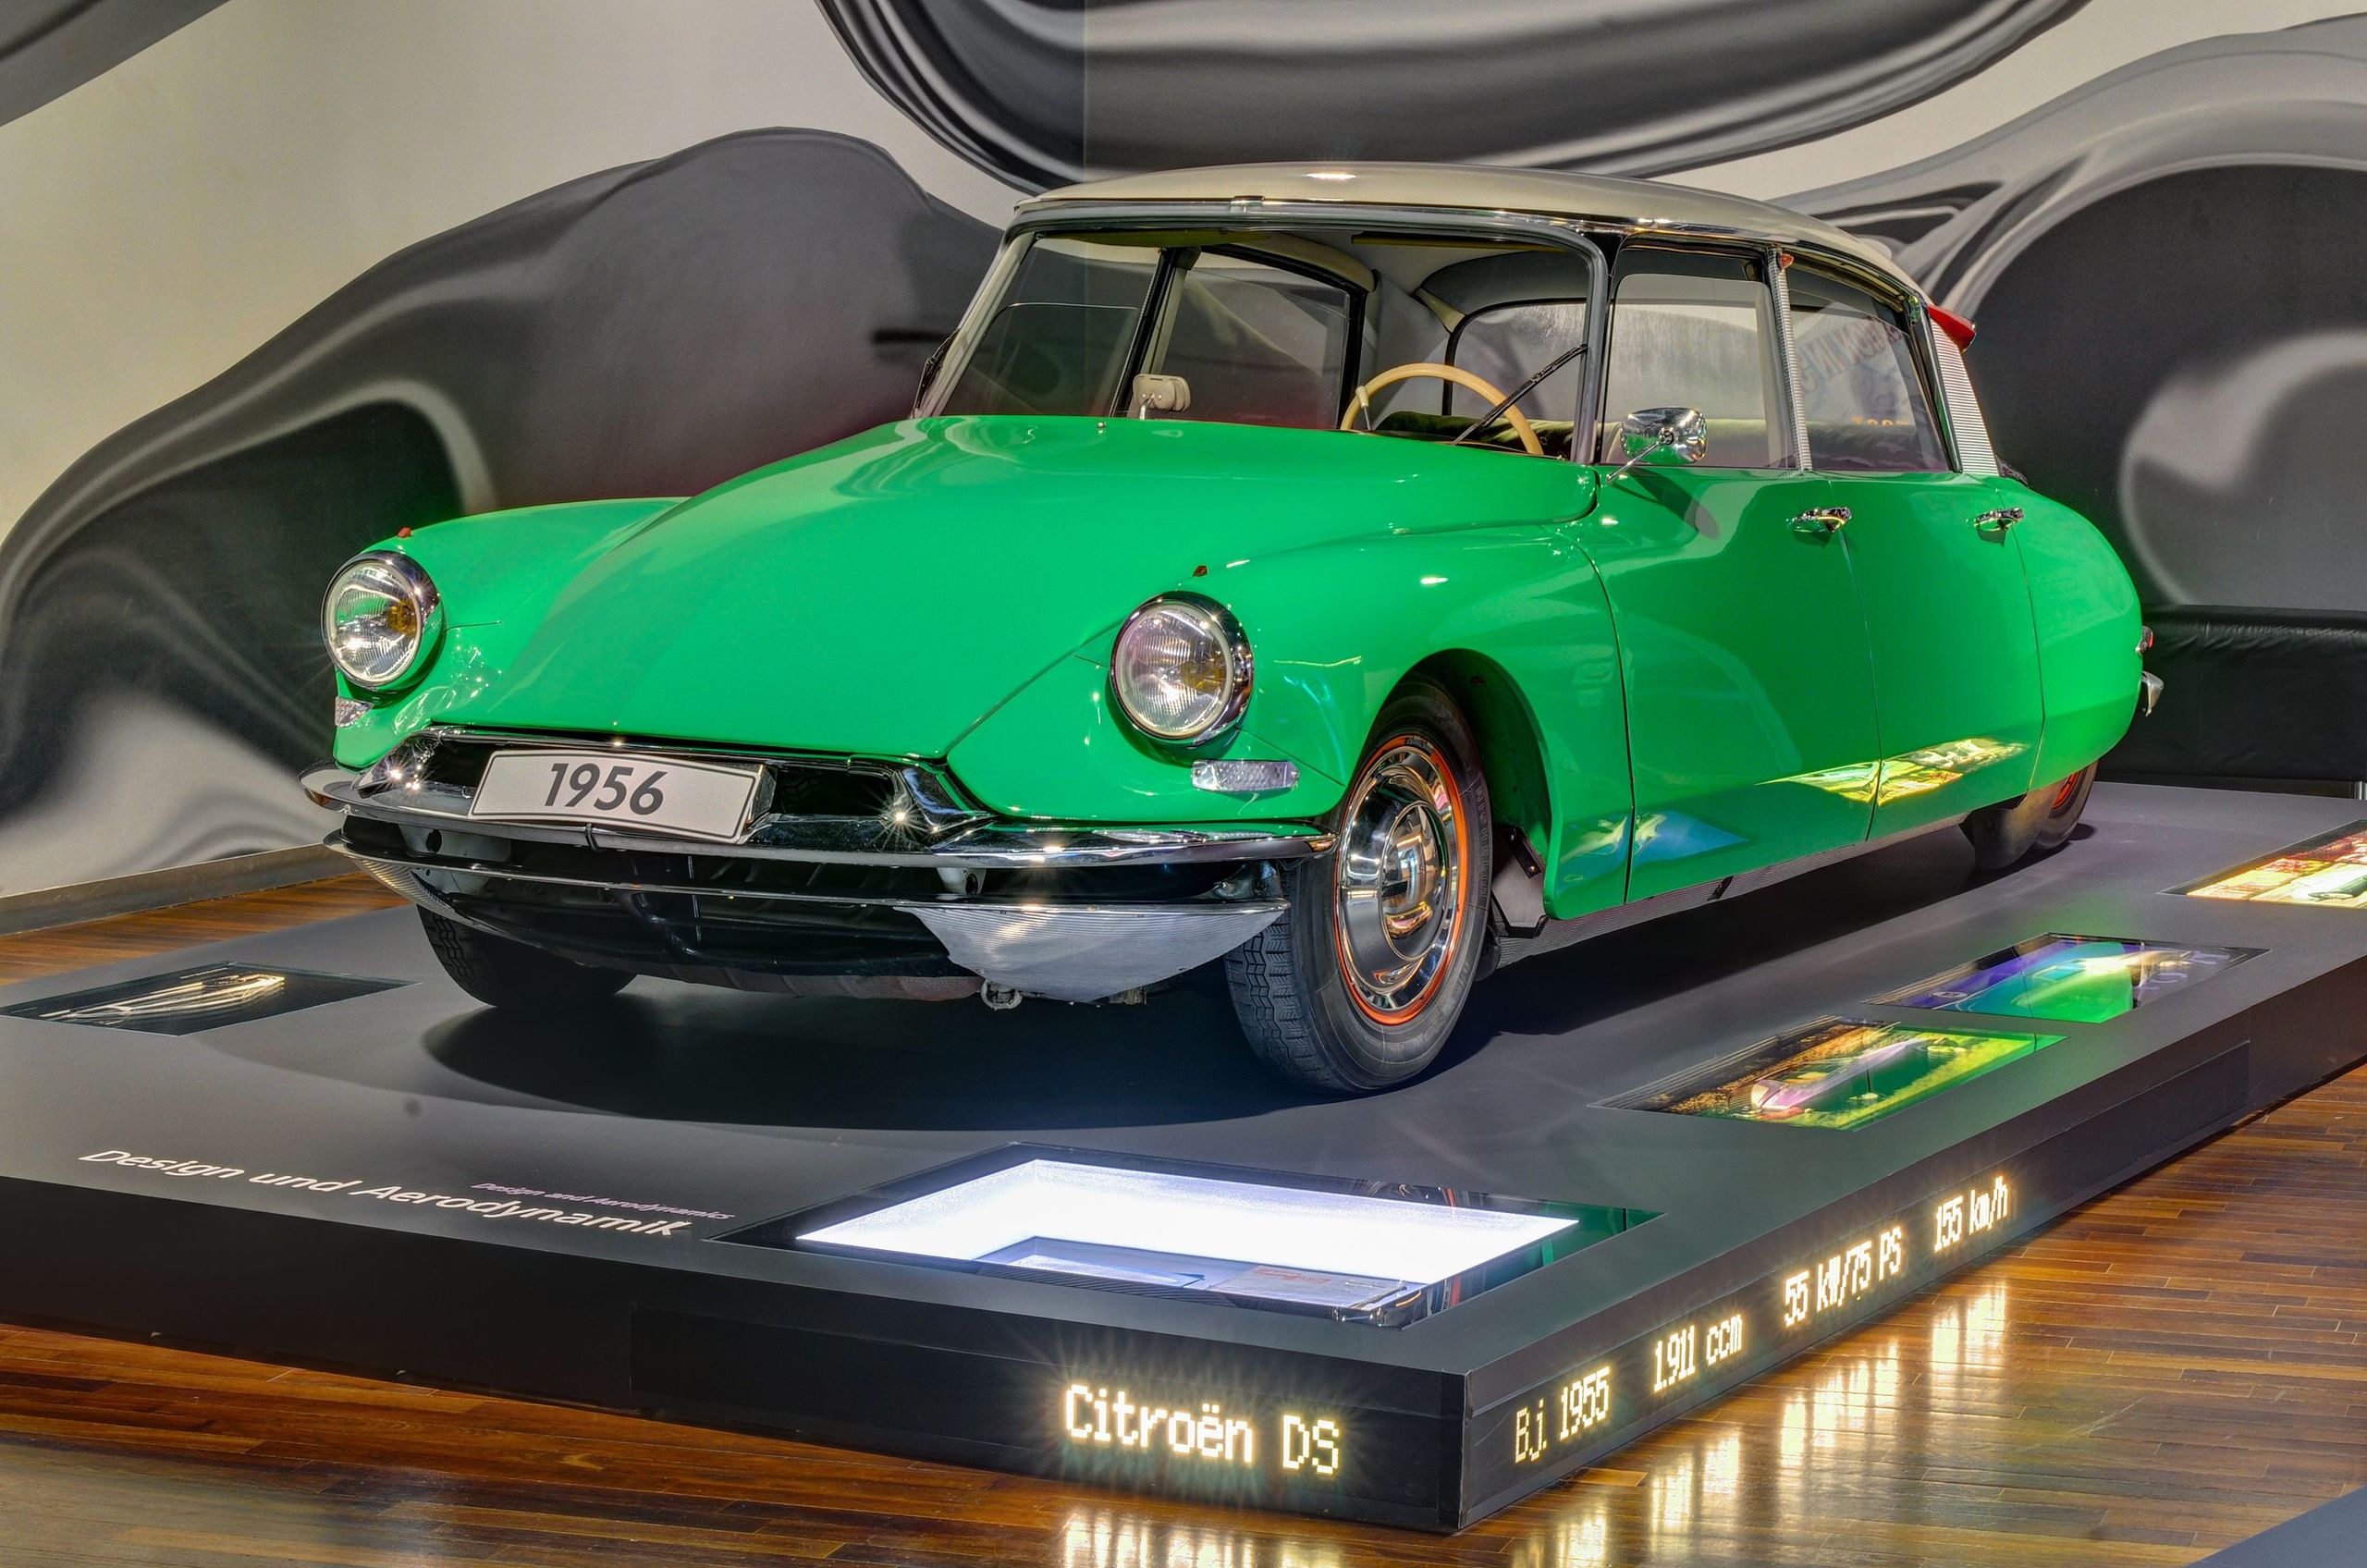 Citroën DS 1956
By Ralf Roletschek - Own work, FAL, https://commons.wikimedia.org/w/index.php?curid=18975176